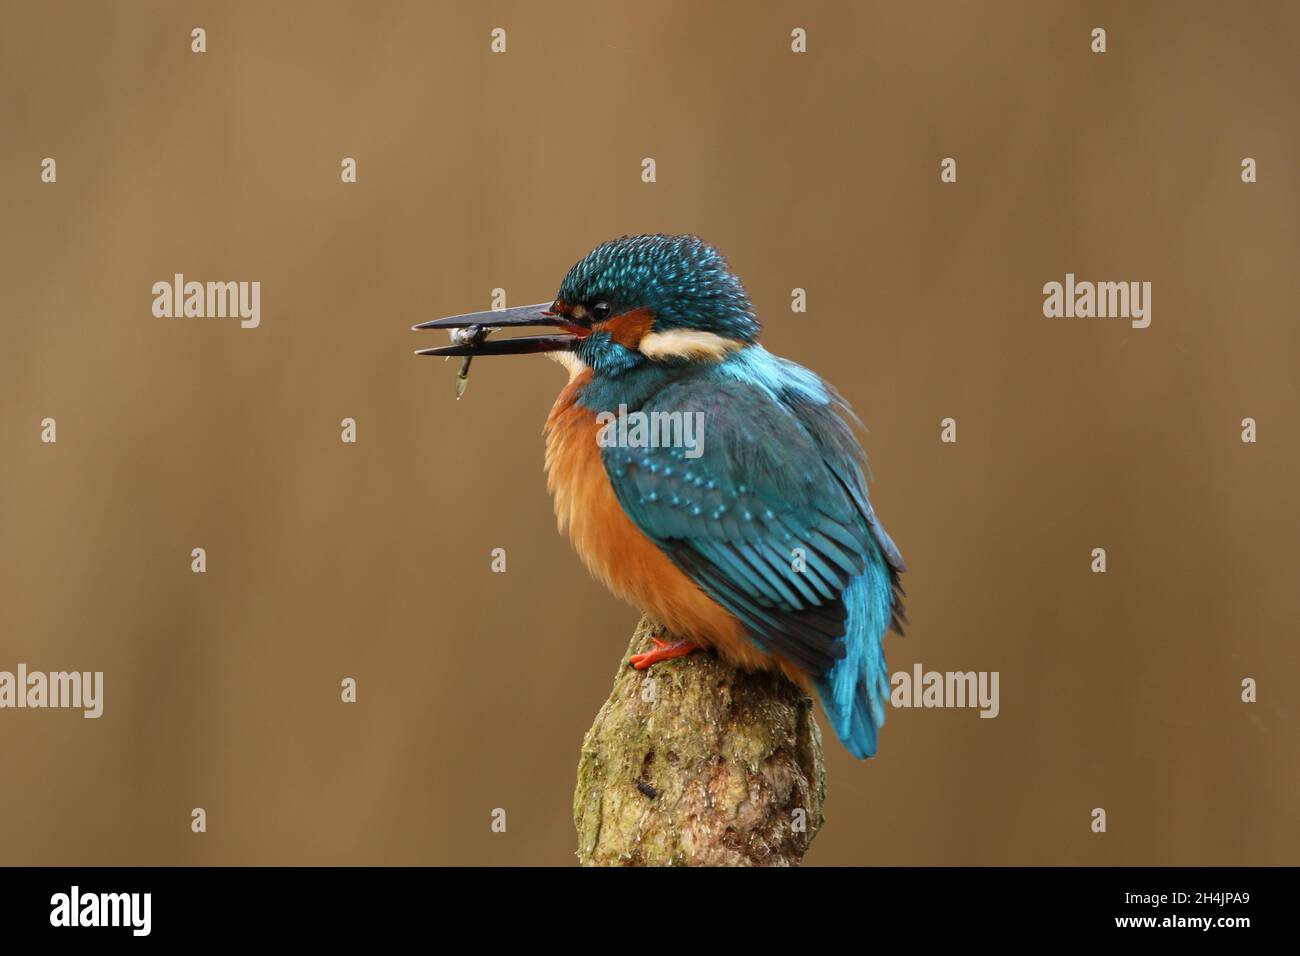 The kingfisher is one of the most colourful birds of the British Isles.  Adults have red feet and a thicker longer bill than juveniles. Stock Photo